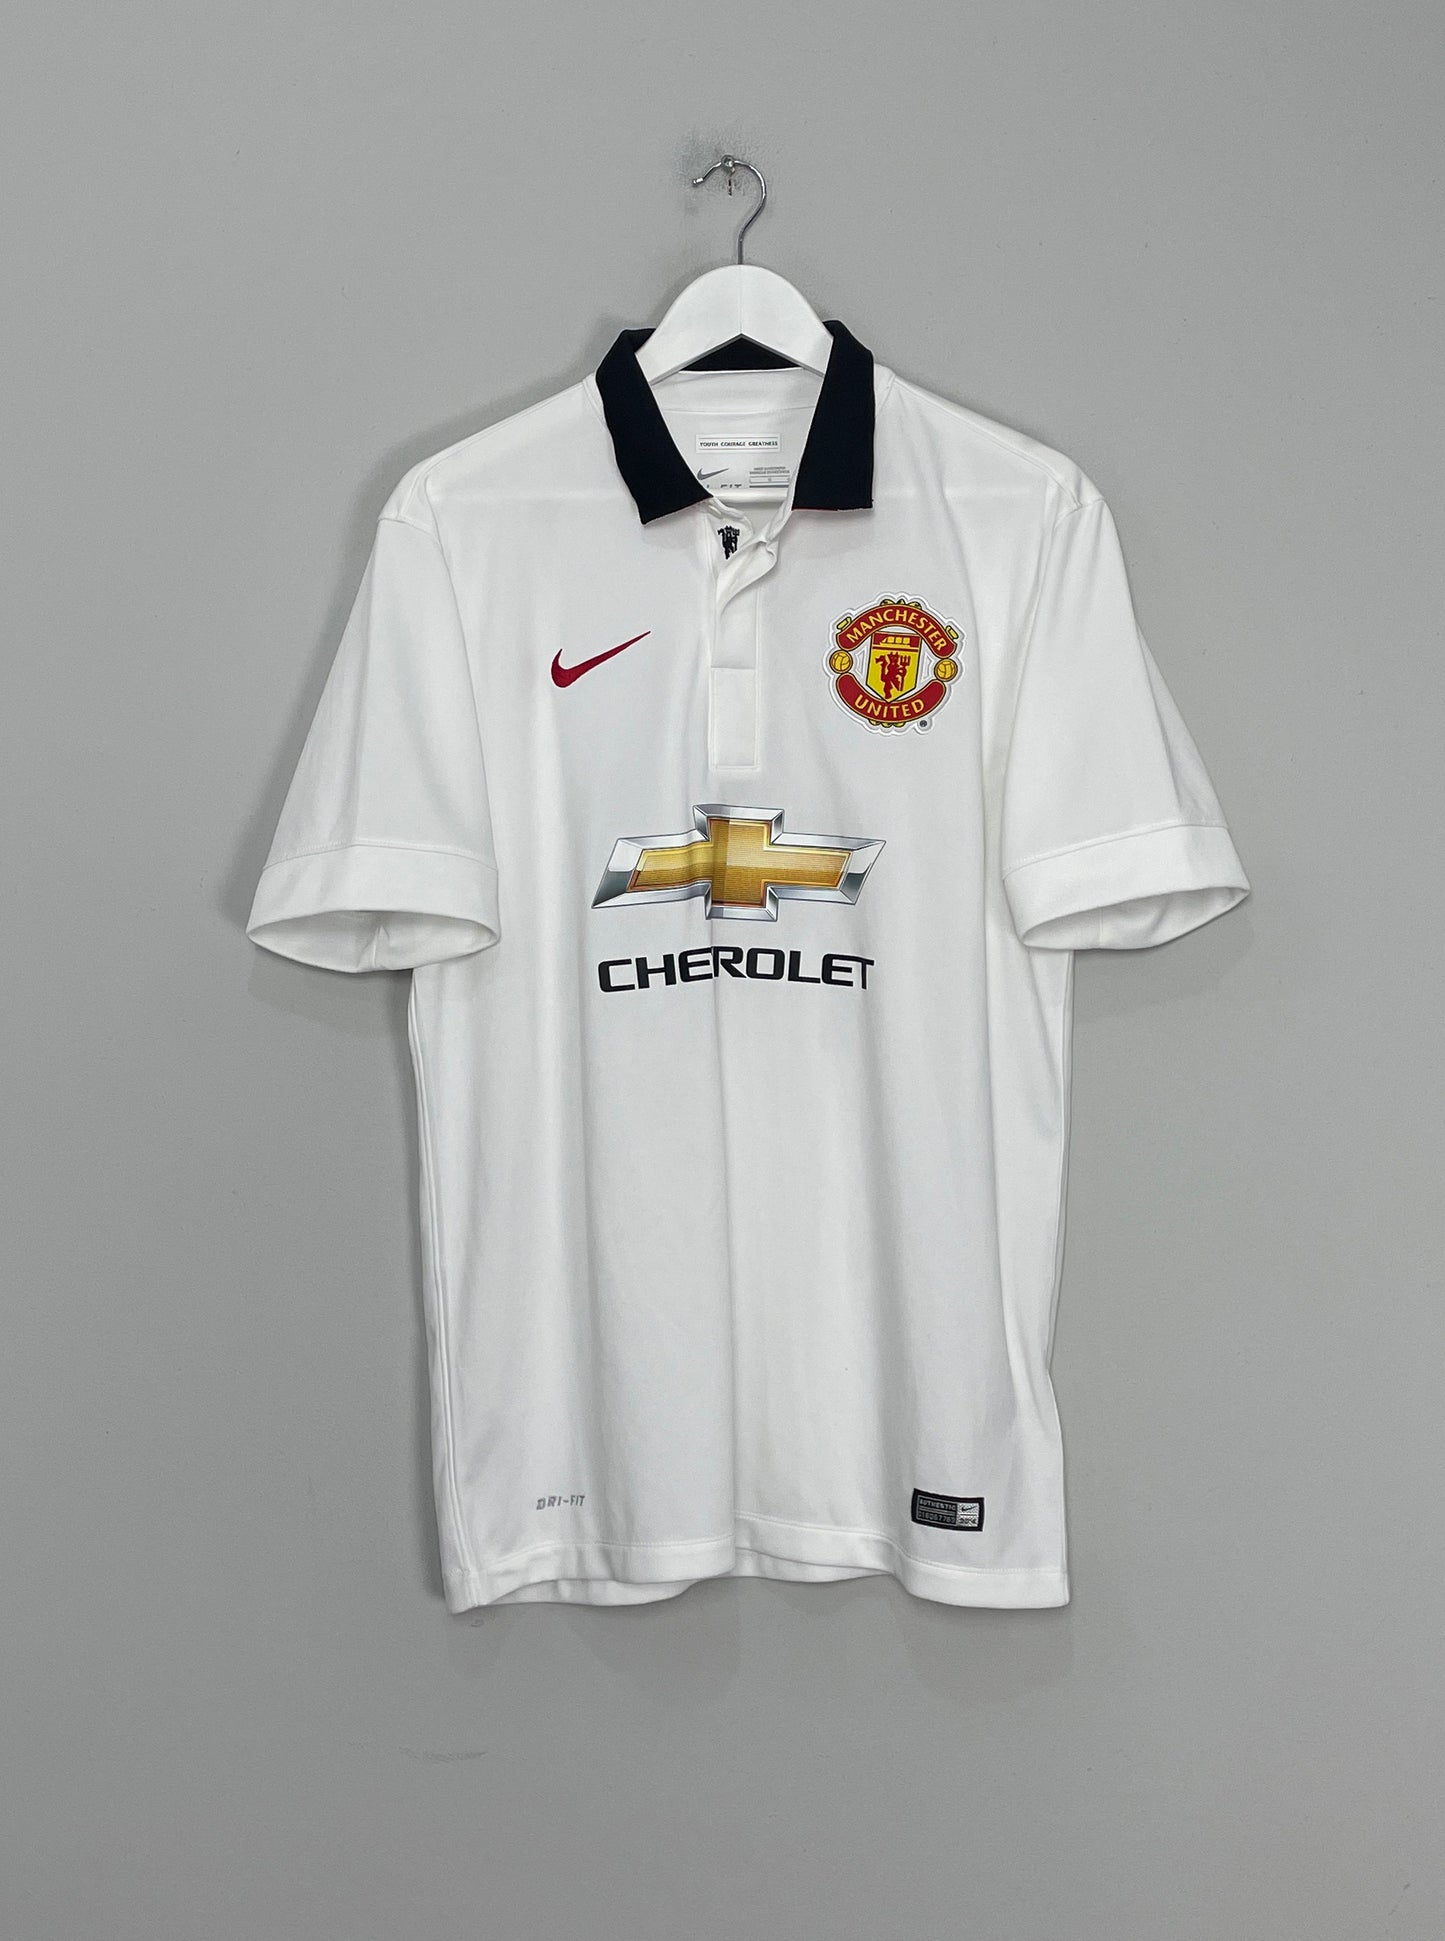 2014/15 MANCHESTER UNITED ROONEY #10 AWAY SHIRT (L) NIKE